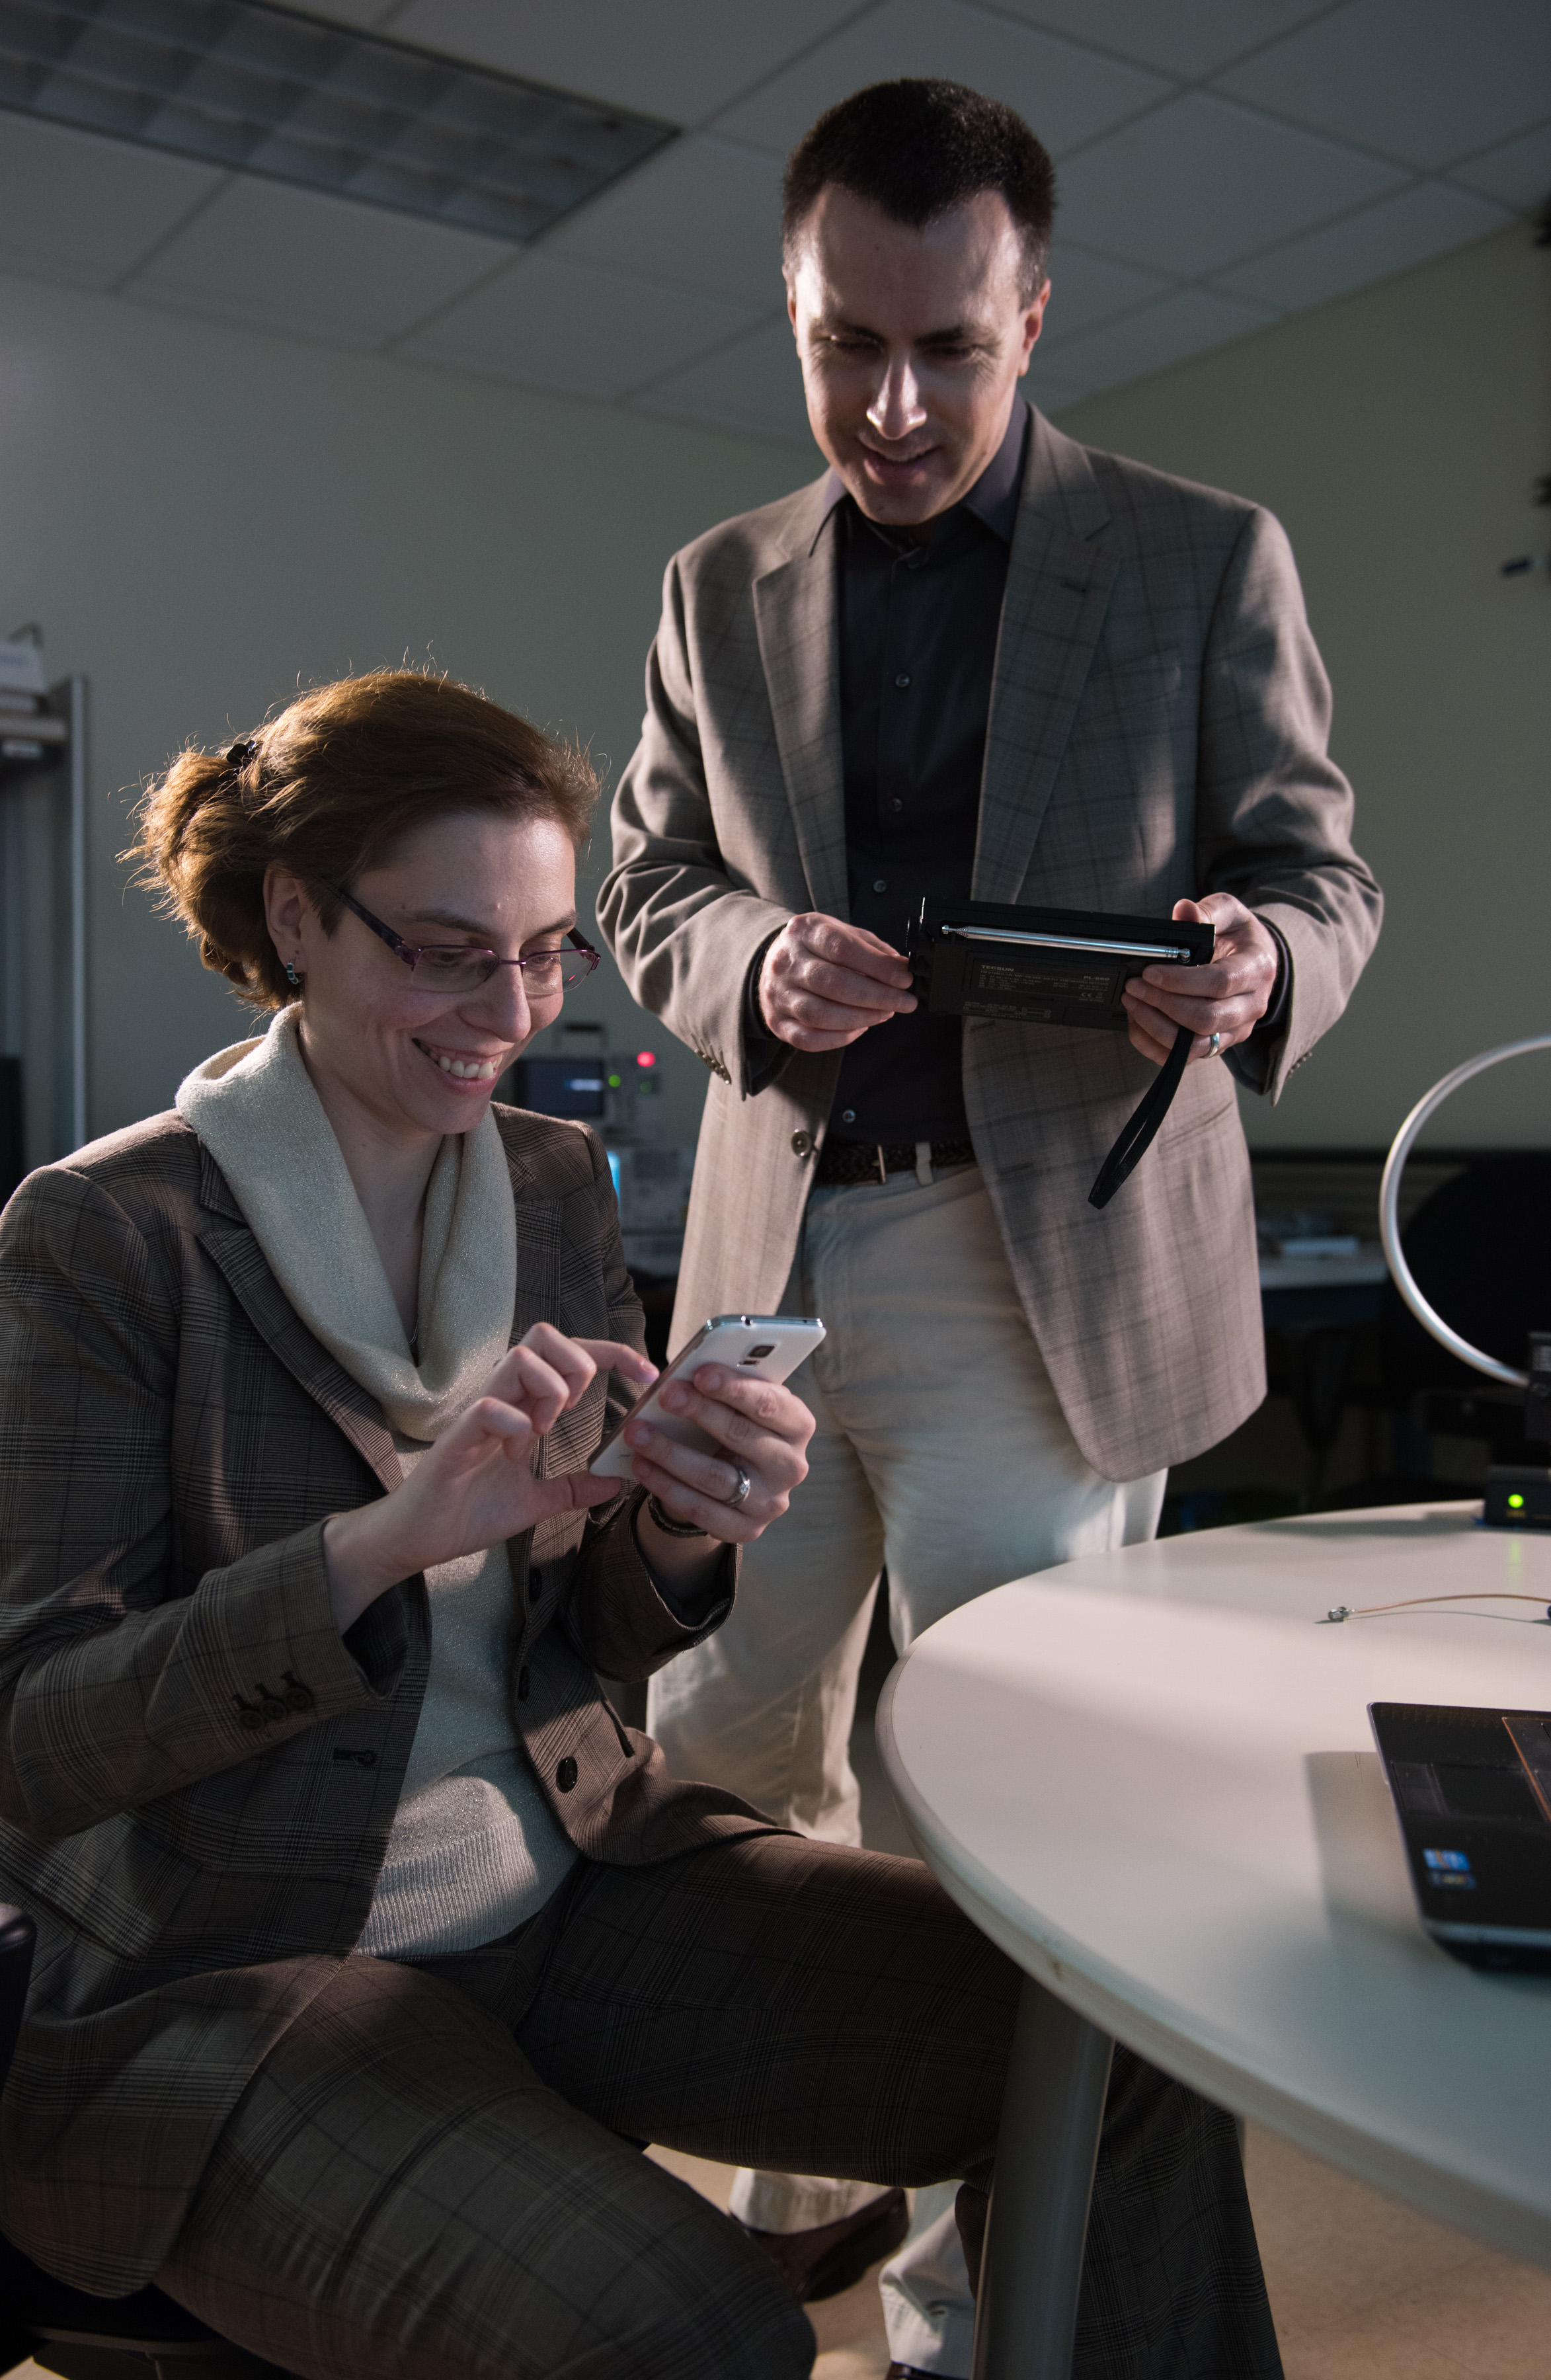 Georgia Tech researchers Alenka Zajic and Milos Prvulovic use a simple AM/FM radio to pick up side-channel signals from a cell phone. Such unintentional signals could be used to learn what computations are being done by the device.  (Credit: Rob Felt)